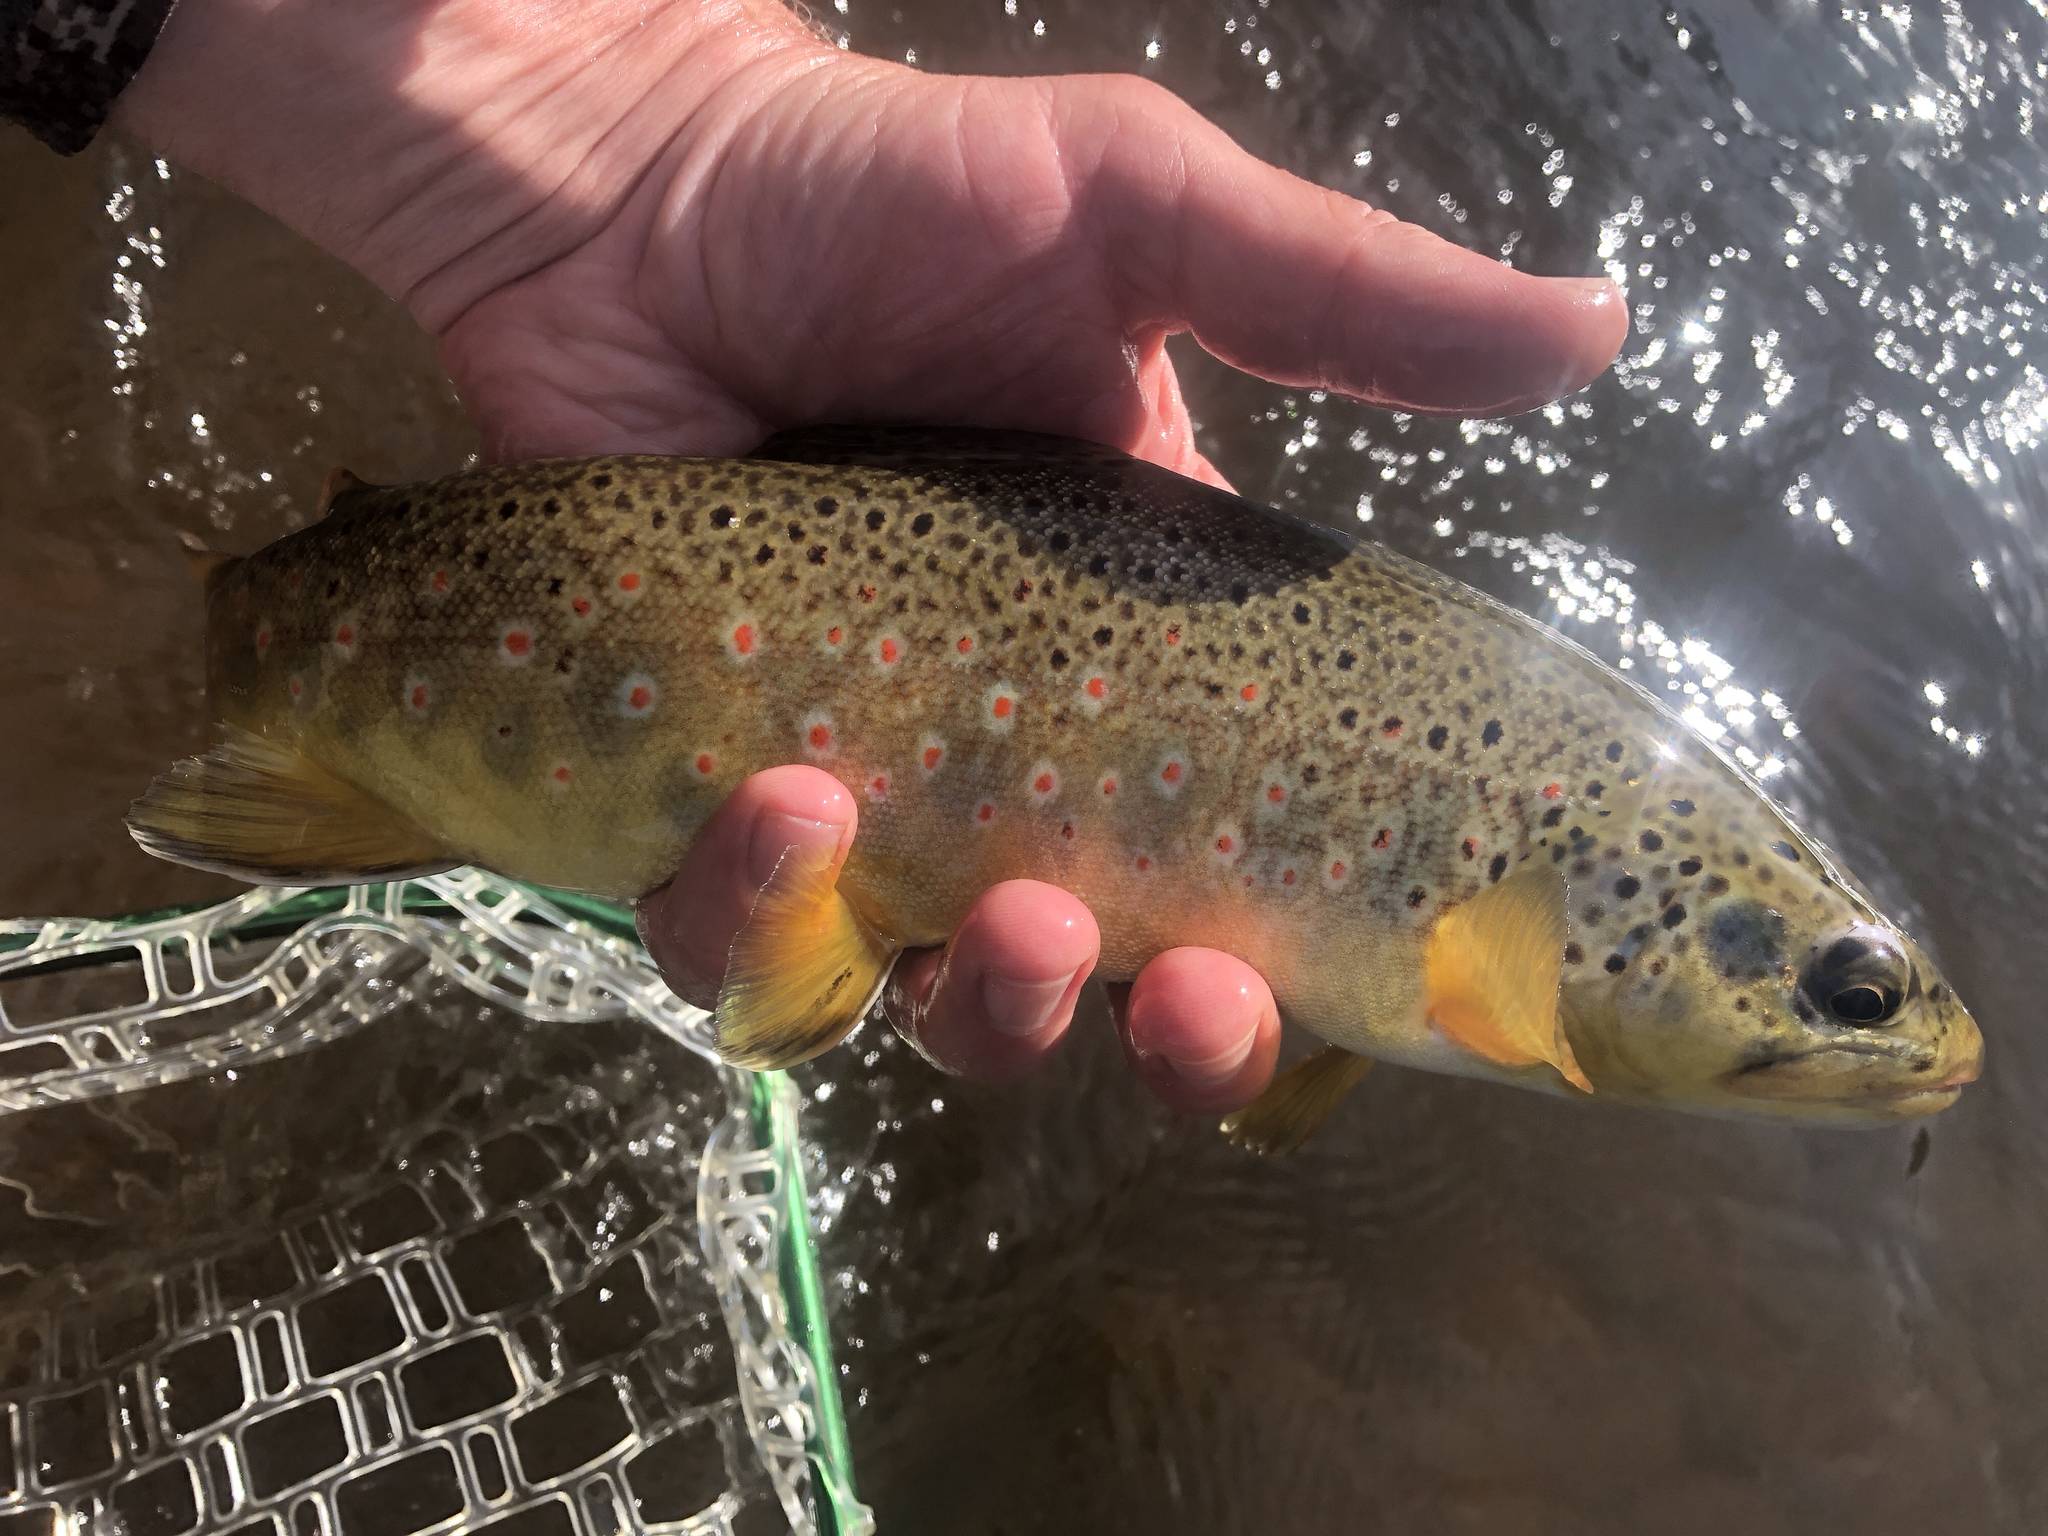 Thanks to writer John Gierach, Jeff Lund has discovered a love for brown trout, bamboo fly rods and Colorado’s Frying Pan river. (Jeff Lund / For the Juneau Empire)